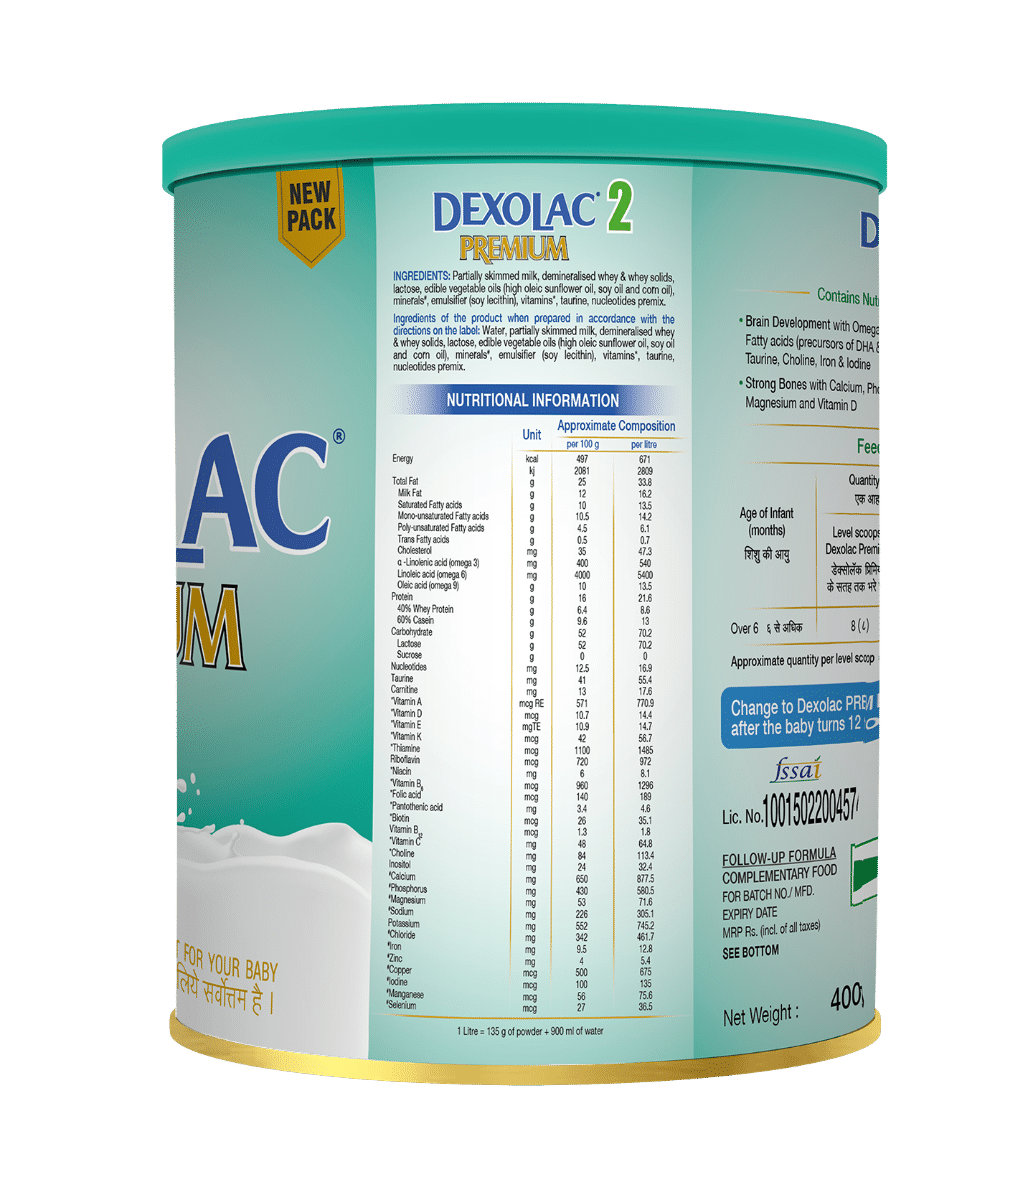 Dexolac Premium Infant Formula Stage 2 Powder for After 6 Months Kid, 400 gm, Pack of 1 